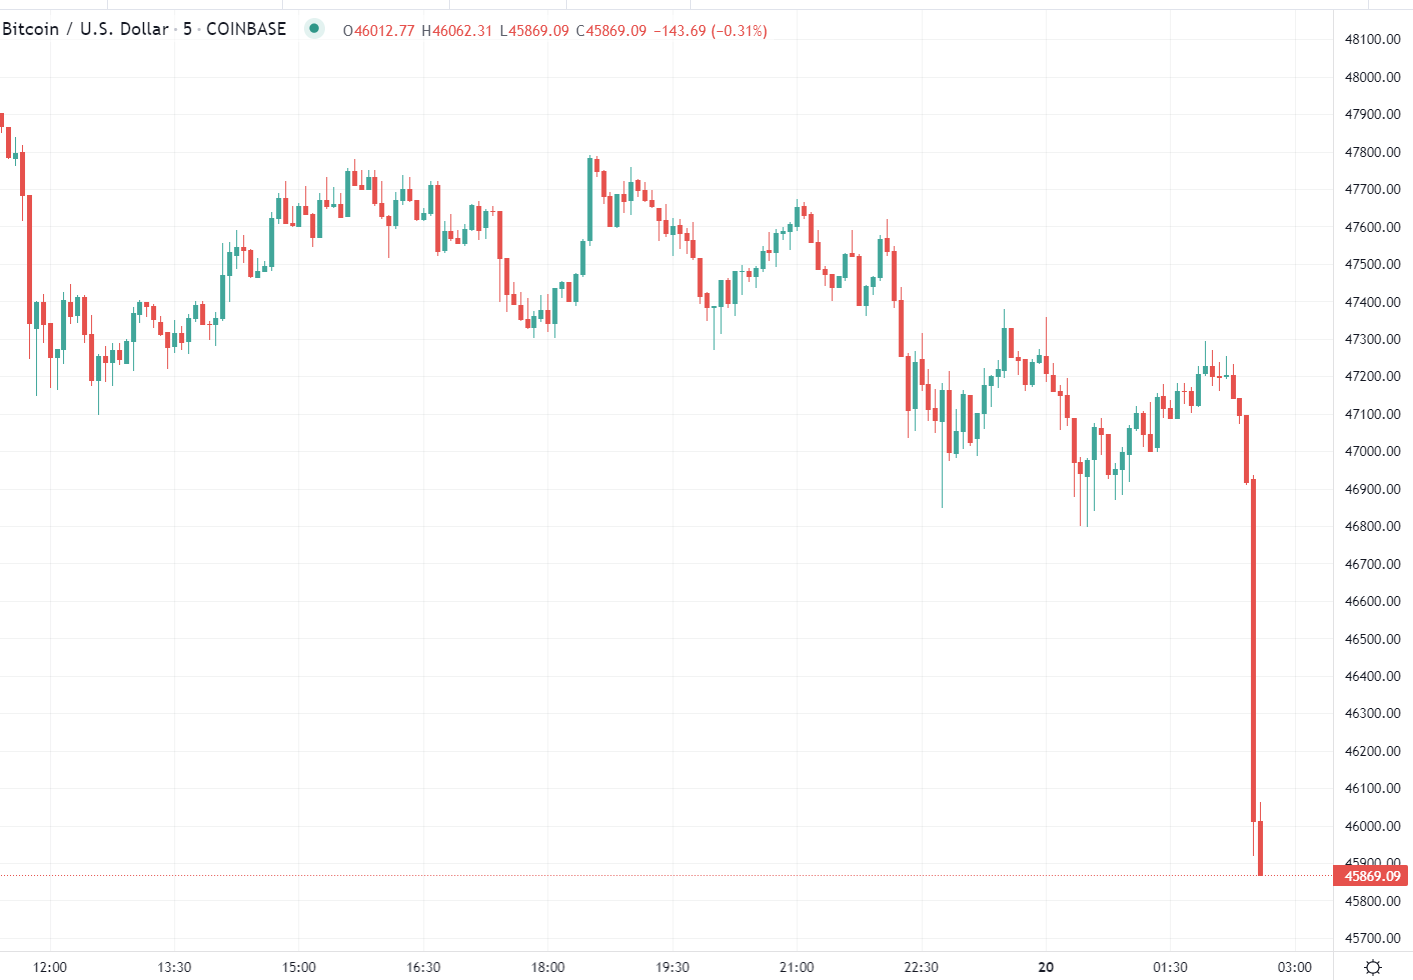 BTC/USD has been dripping lower during the session and its gathering pace to the downside now: